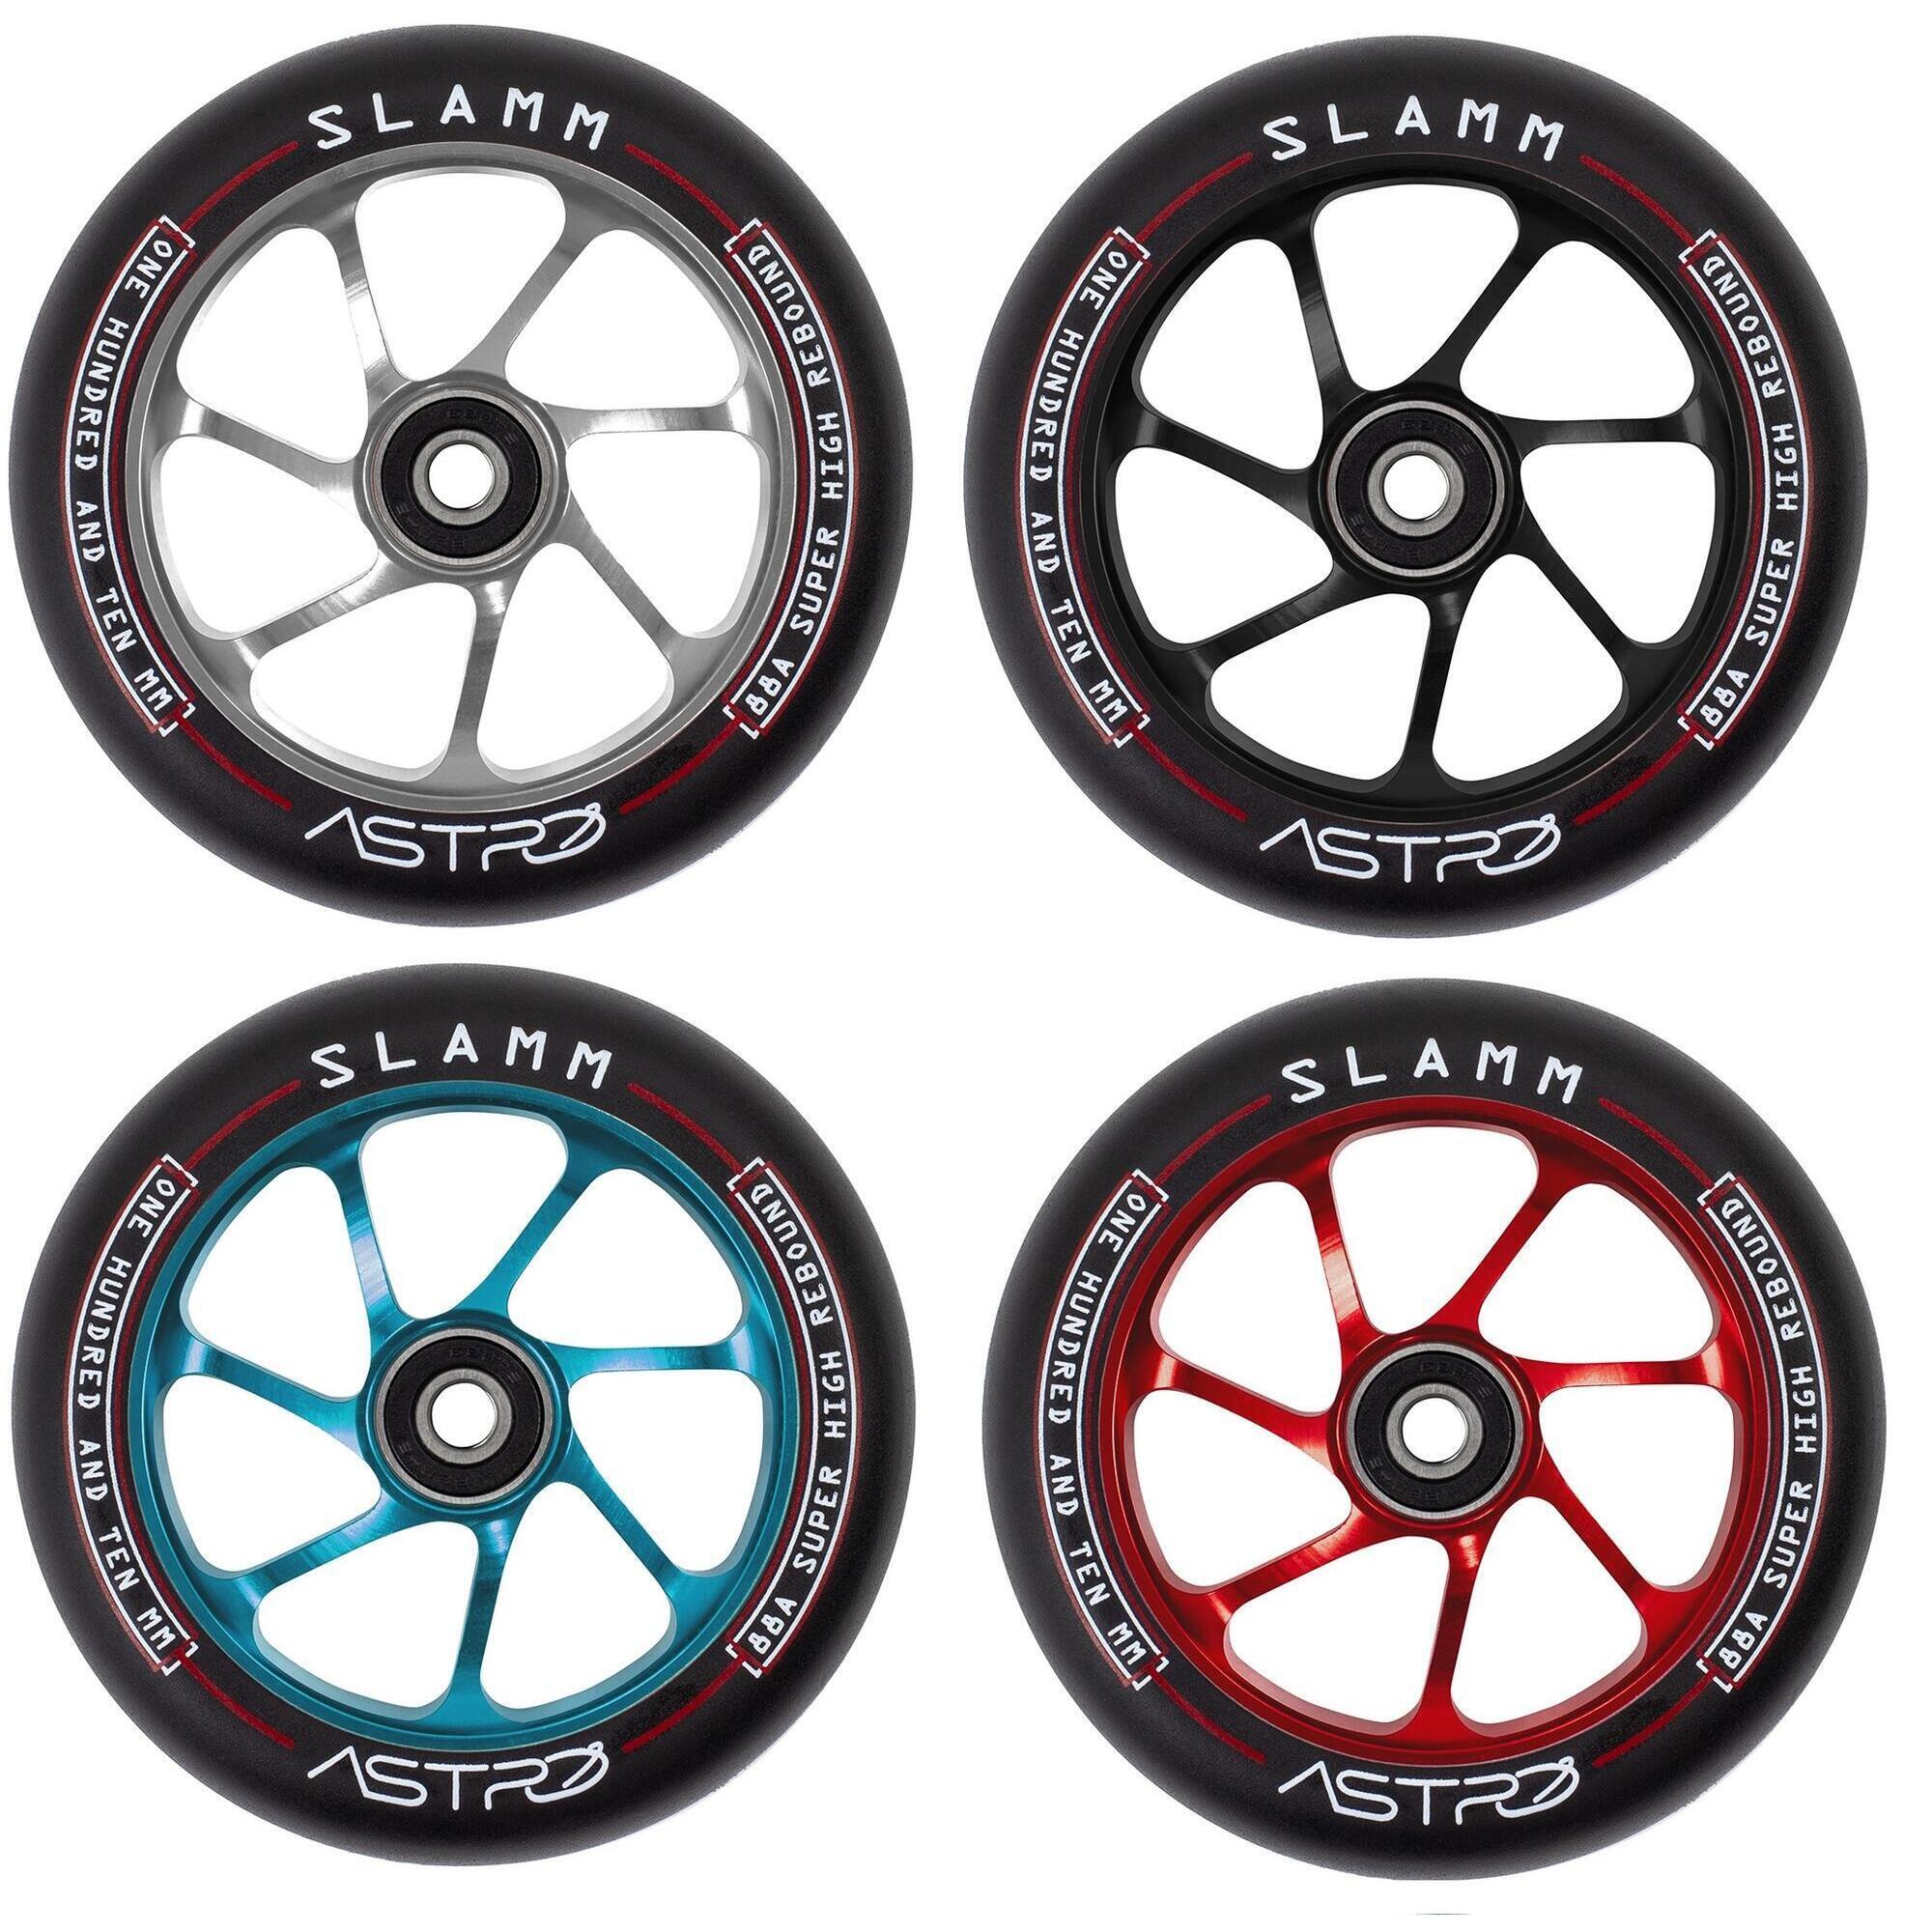 Astro 110mm Alloy Core Scooter Wheel and Bearings 1/3